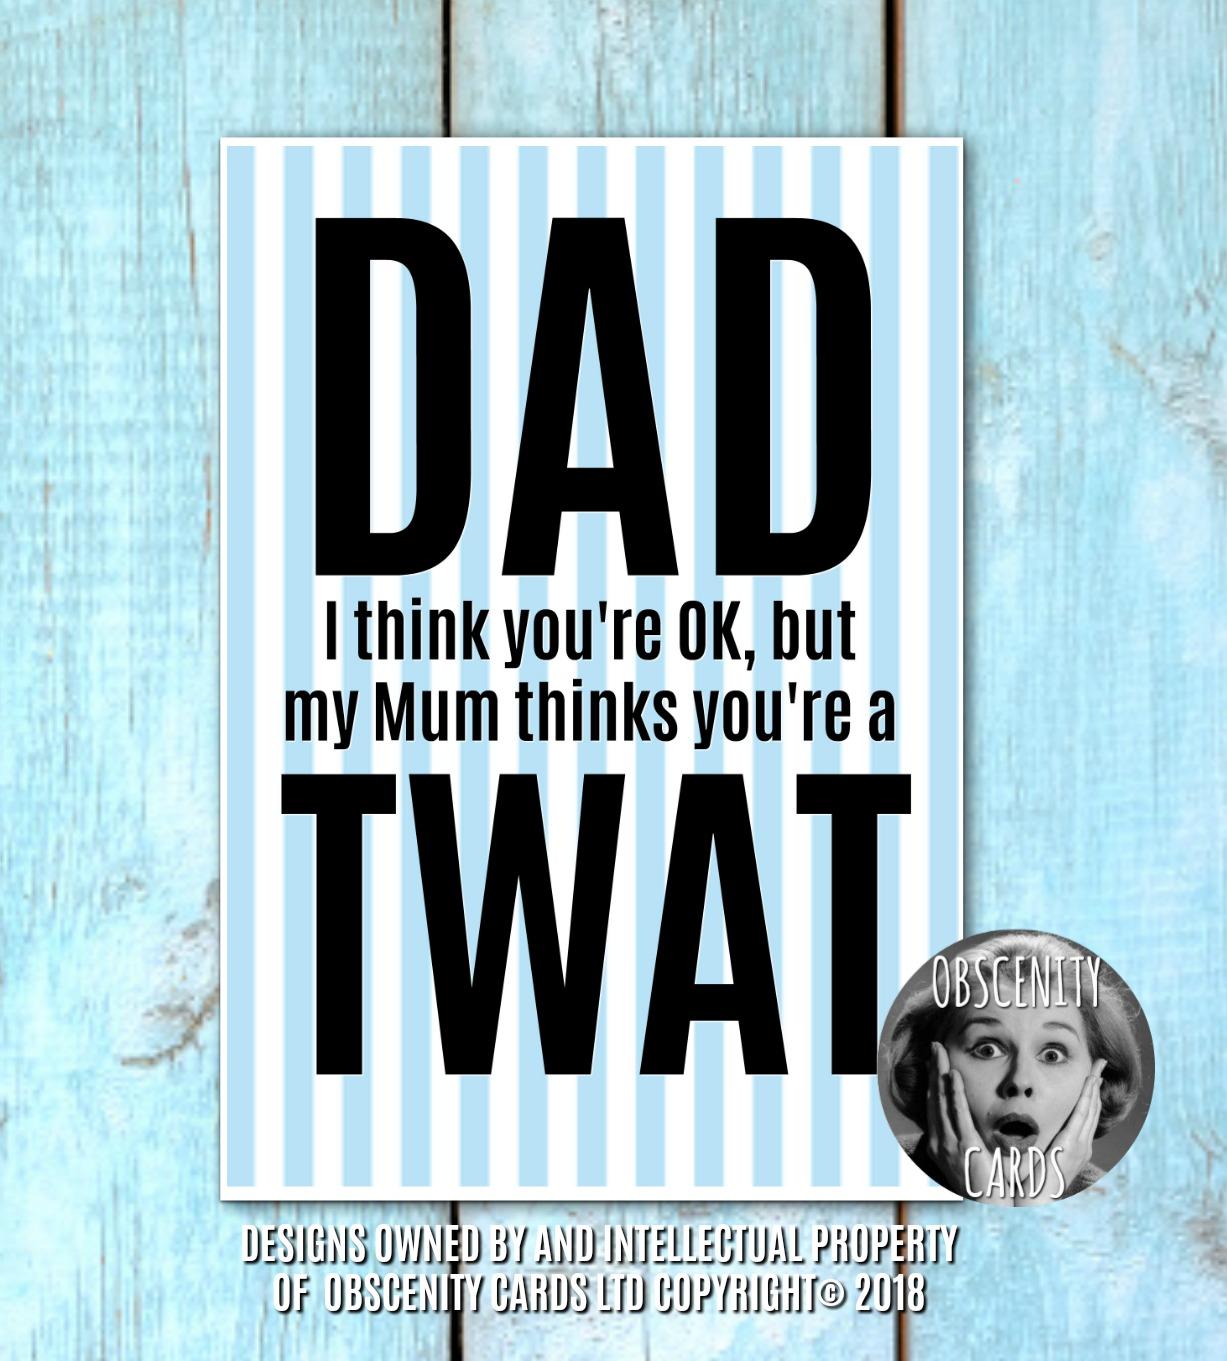 Obscene funny offensive FATHER'S DAY cards by Obscenity cards. Obscene Funny Cards, Pens, Party Hats, Key rings, Magnets, Lighters & Loads More!